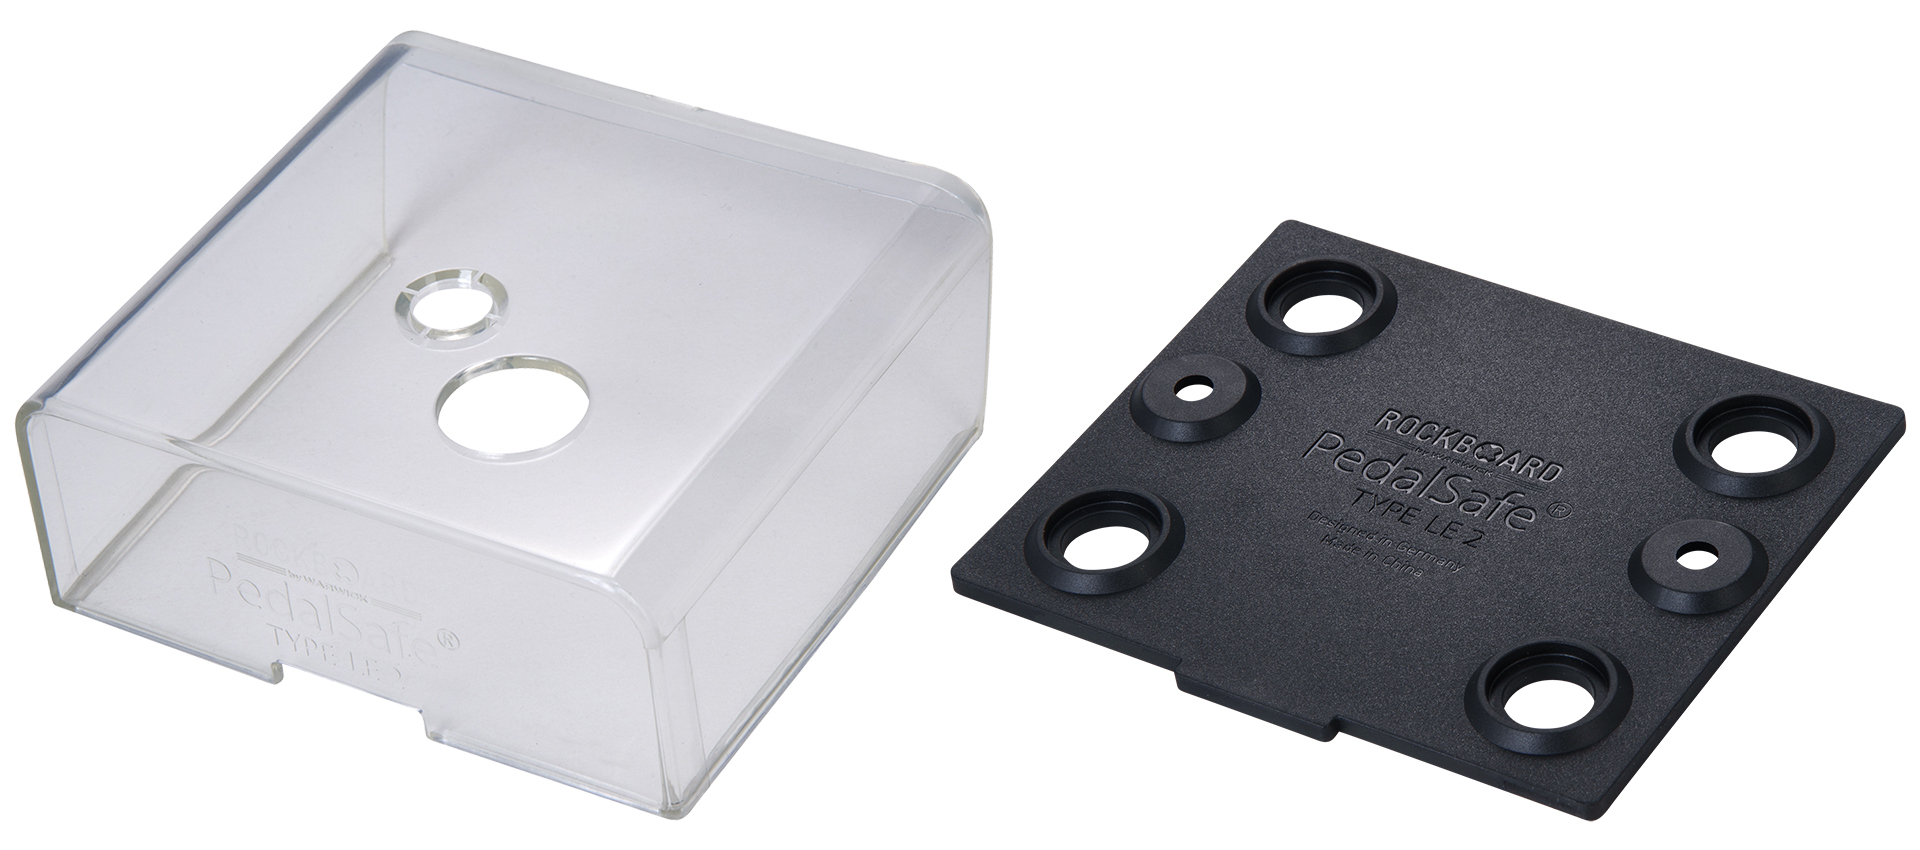 RockBoard PedalSafe Type LE2 - Protective Cover and Universal Mounting Plate for LEHLE Little Lehle III, SundayDriver SW II pedals